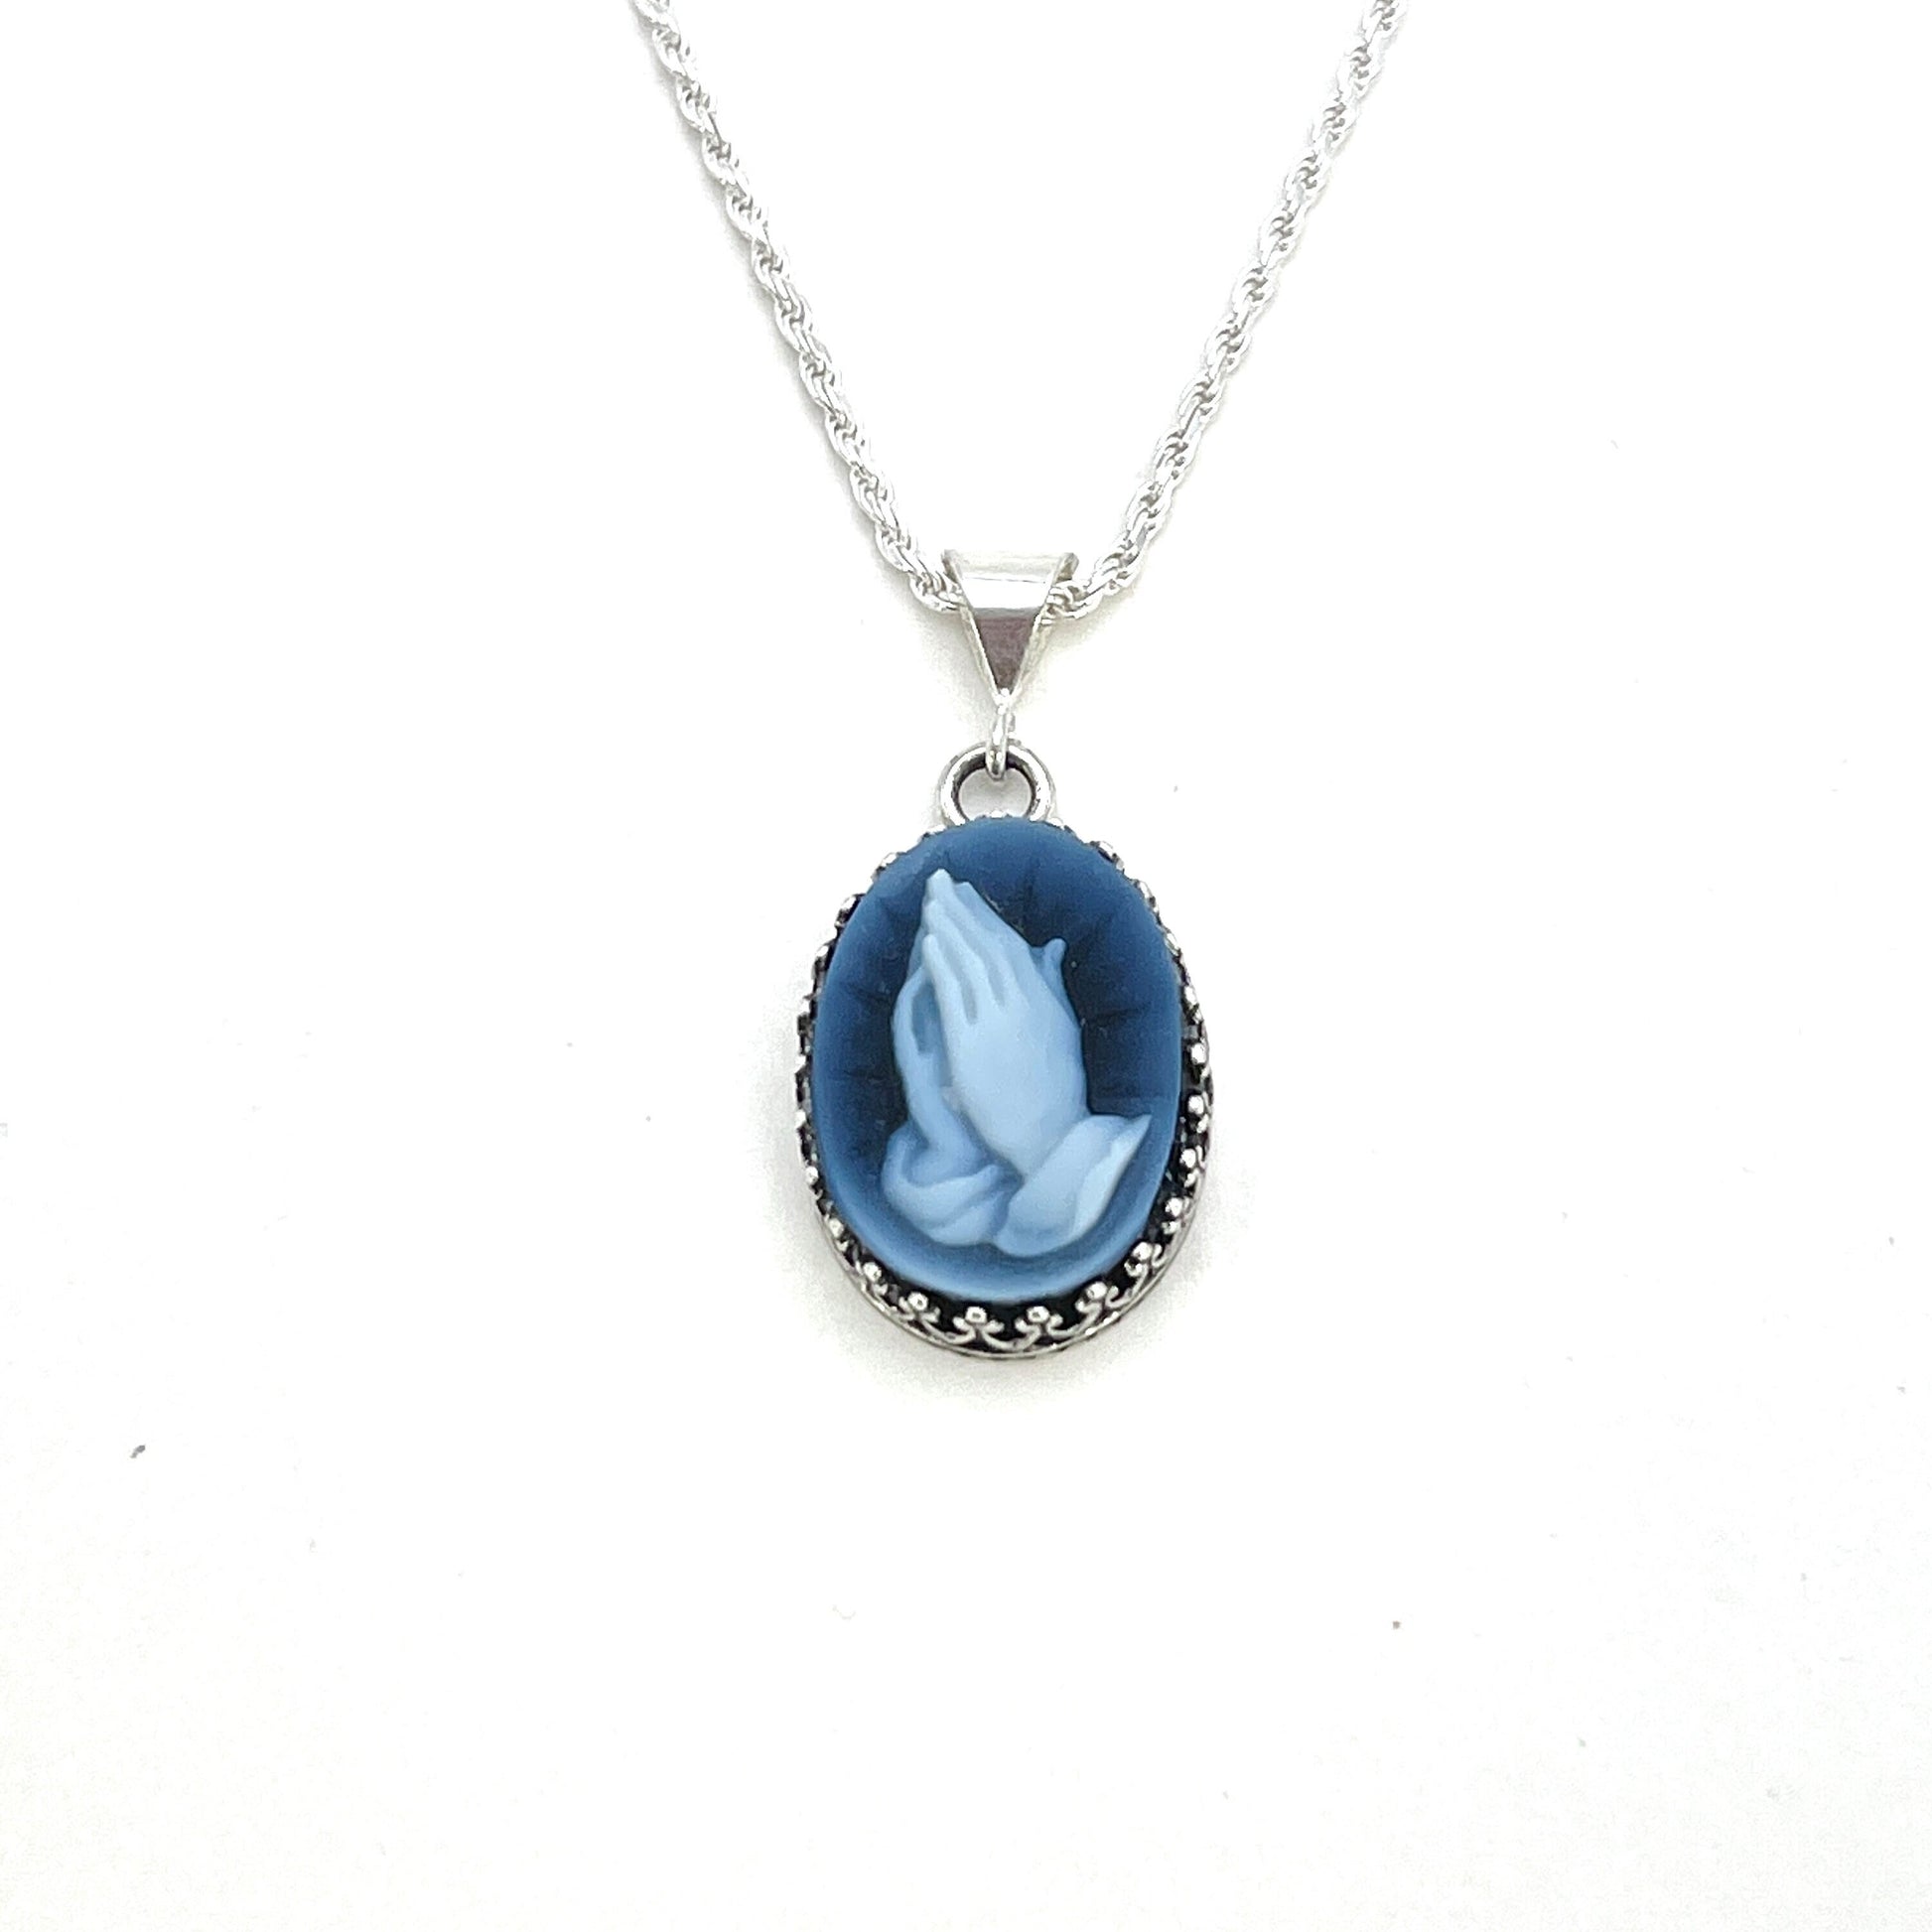 Praying Hands Cameo Necklace, Victorian Necklace, Religious Christian Jewelry, Blue Gemstone Cameo